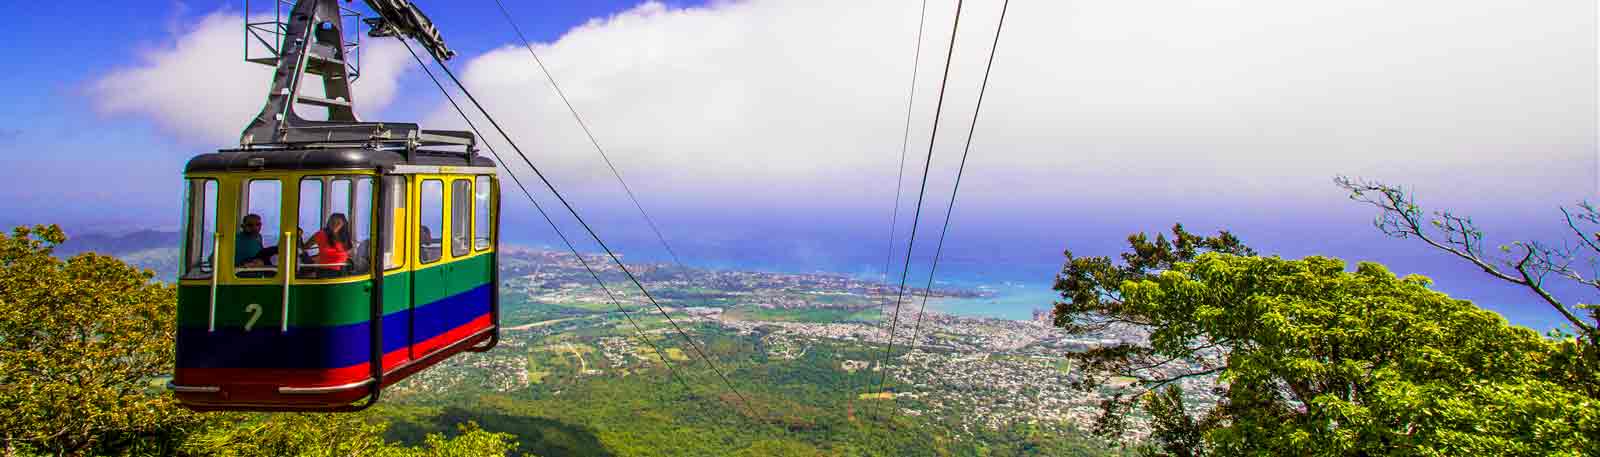 Panoramic photo of Cable Car in Puerto Plata near Amber Cove